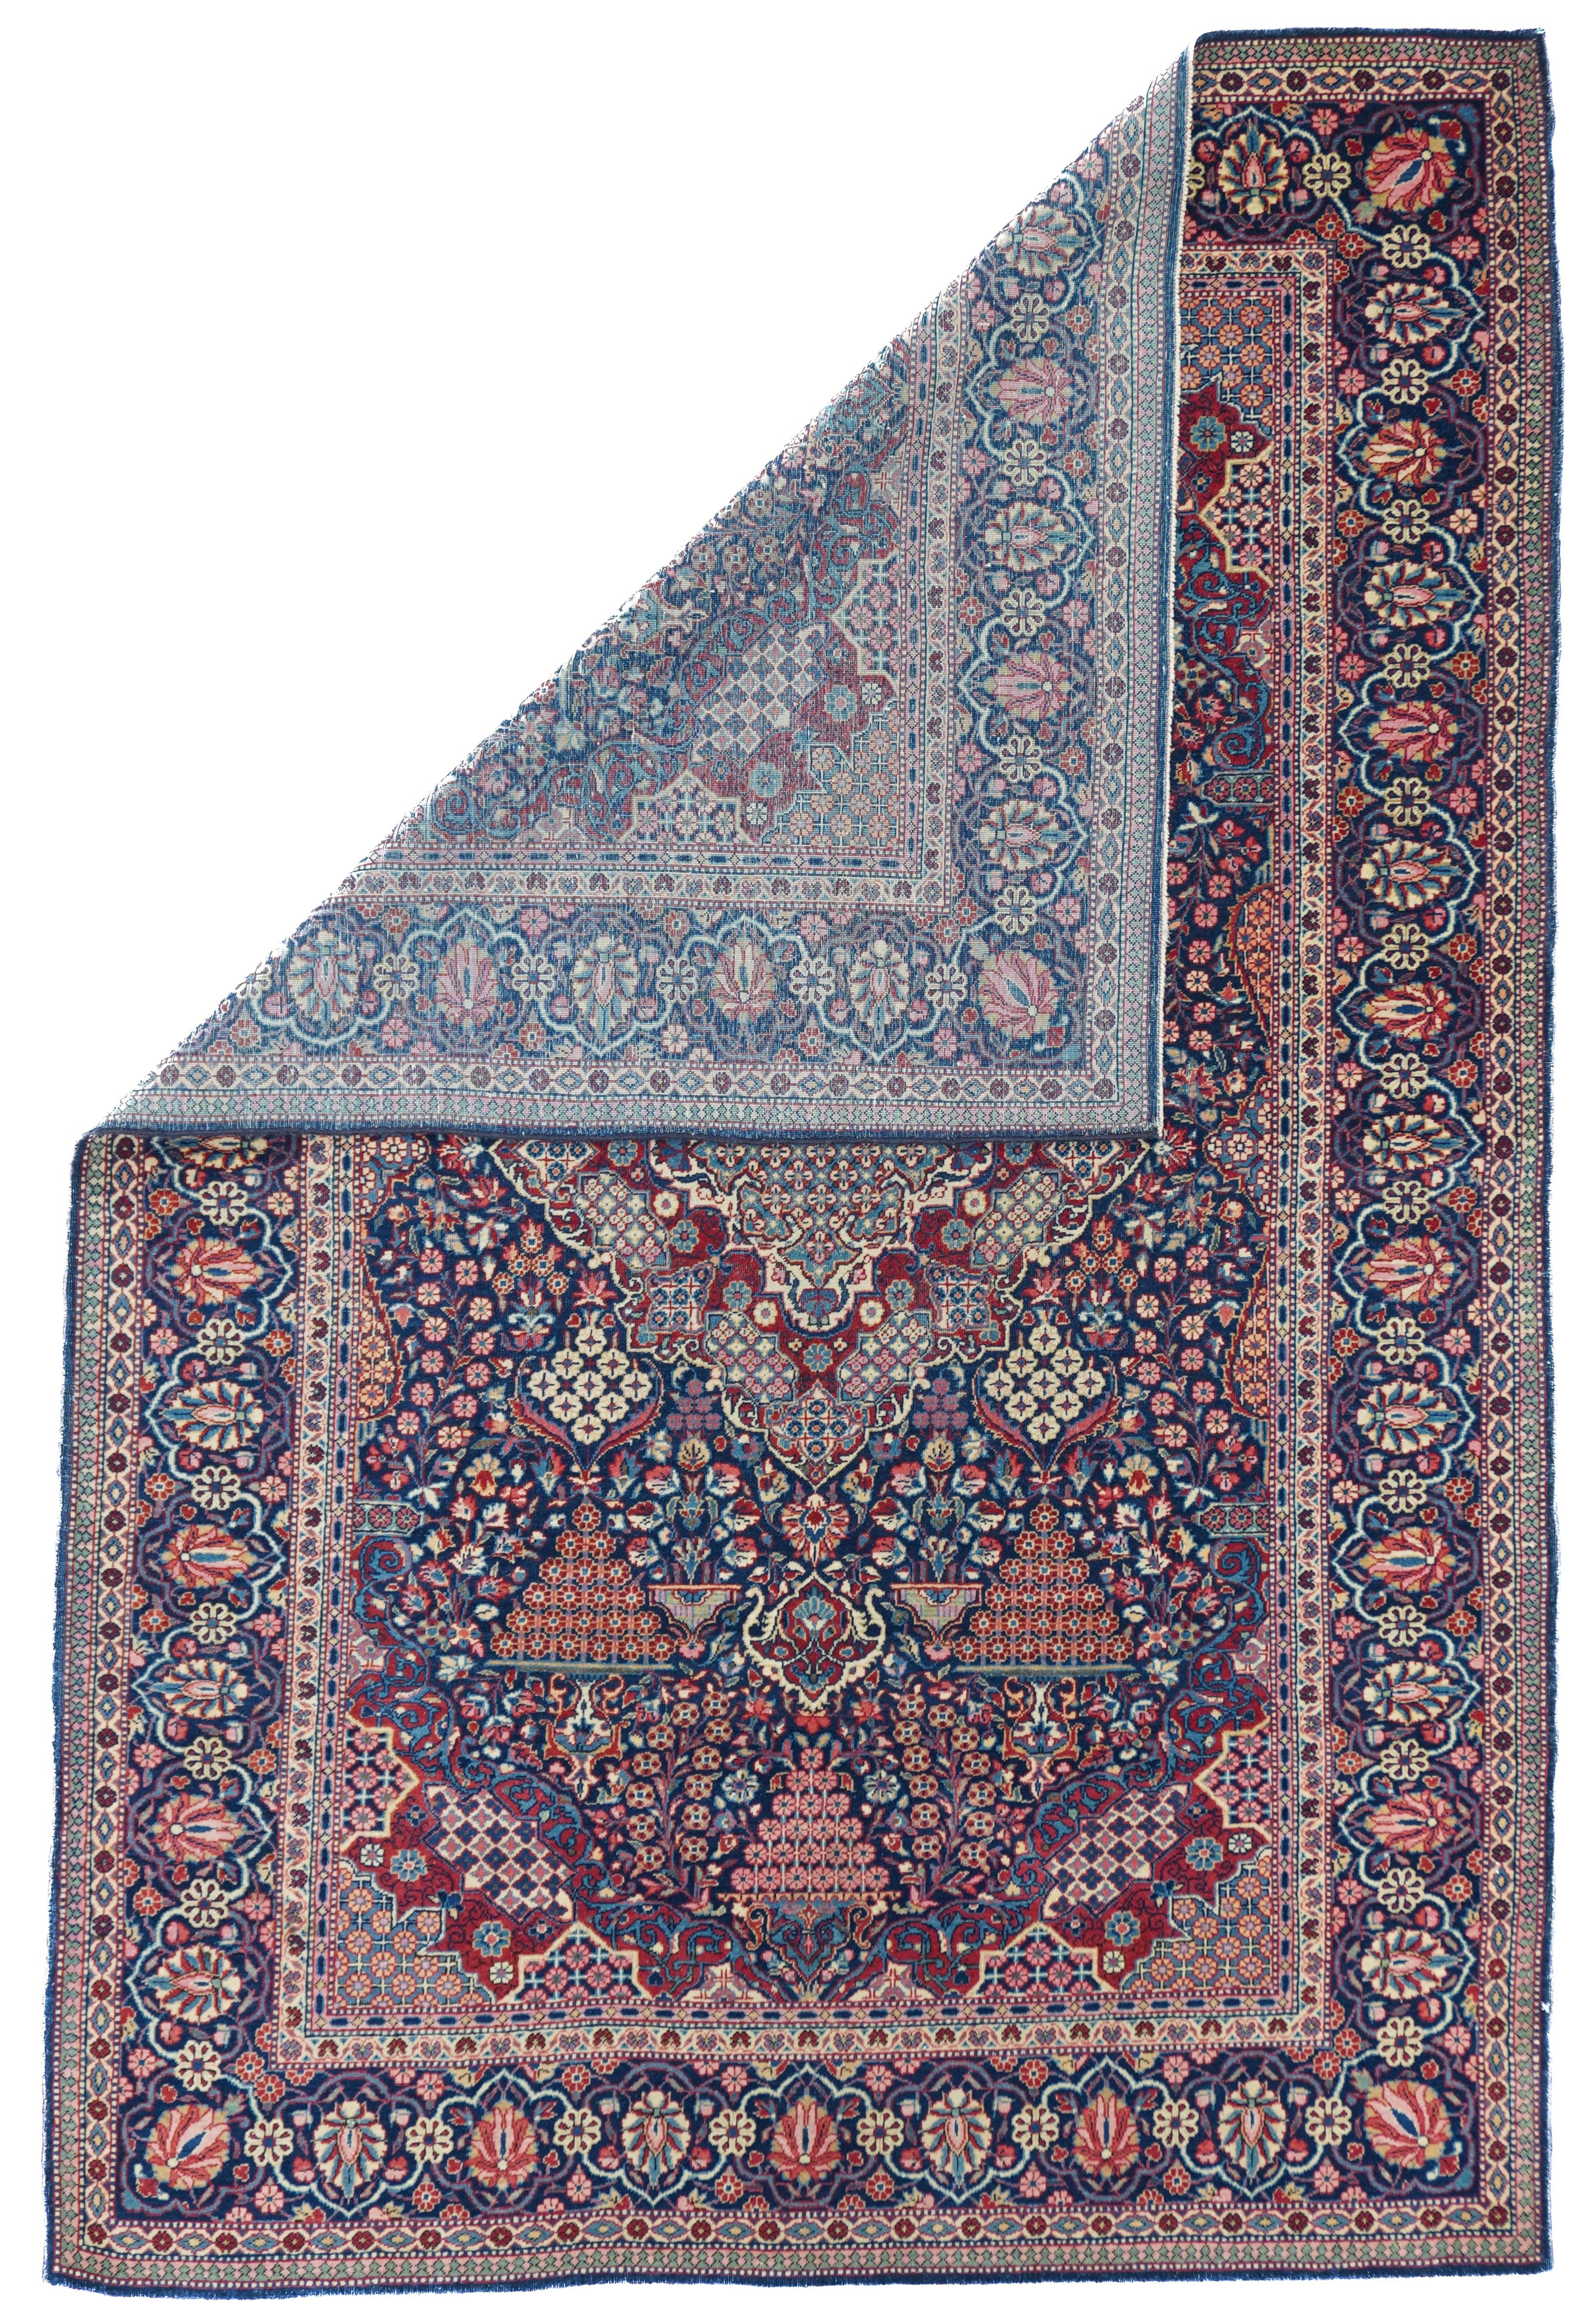 Antique Kashan Dabir rug measures 4'4'' x 6'8''. Finely woven with asymmetric (Persian) knots on a cotton foundation, this jewel-toned central Persian urban scatter shows a barbed diamond medallion in a millefleurs accented dark blue field with